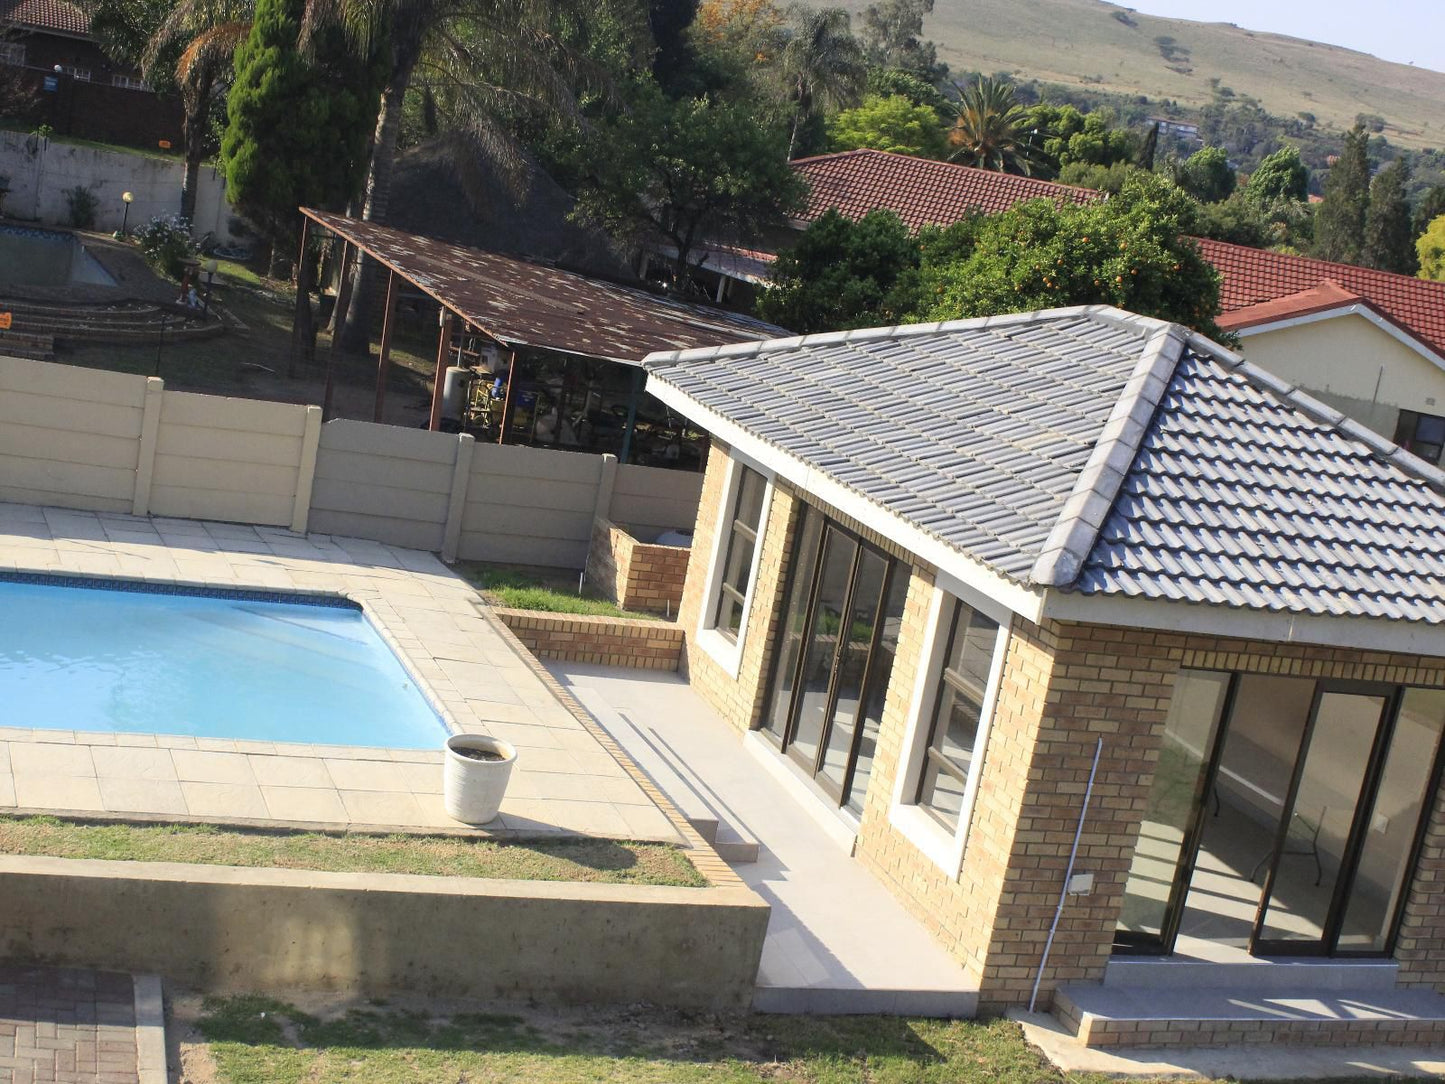 La Bronze Boutique Hotel Aviary Hill Newcastle Kwazulu Natal South Africa House, Building, Architecture, Swimming Pool